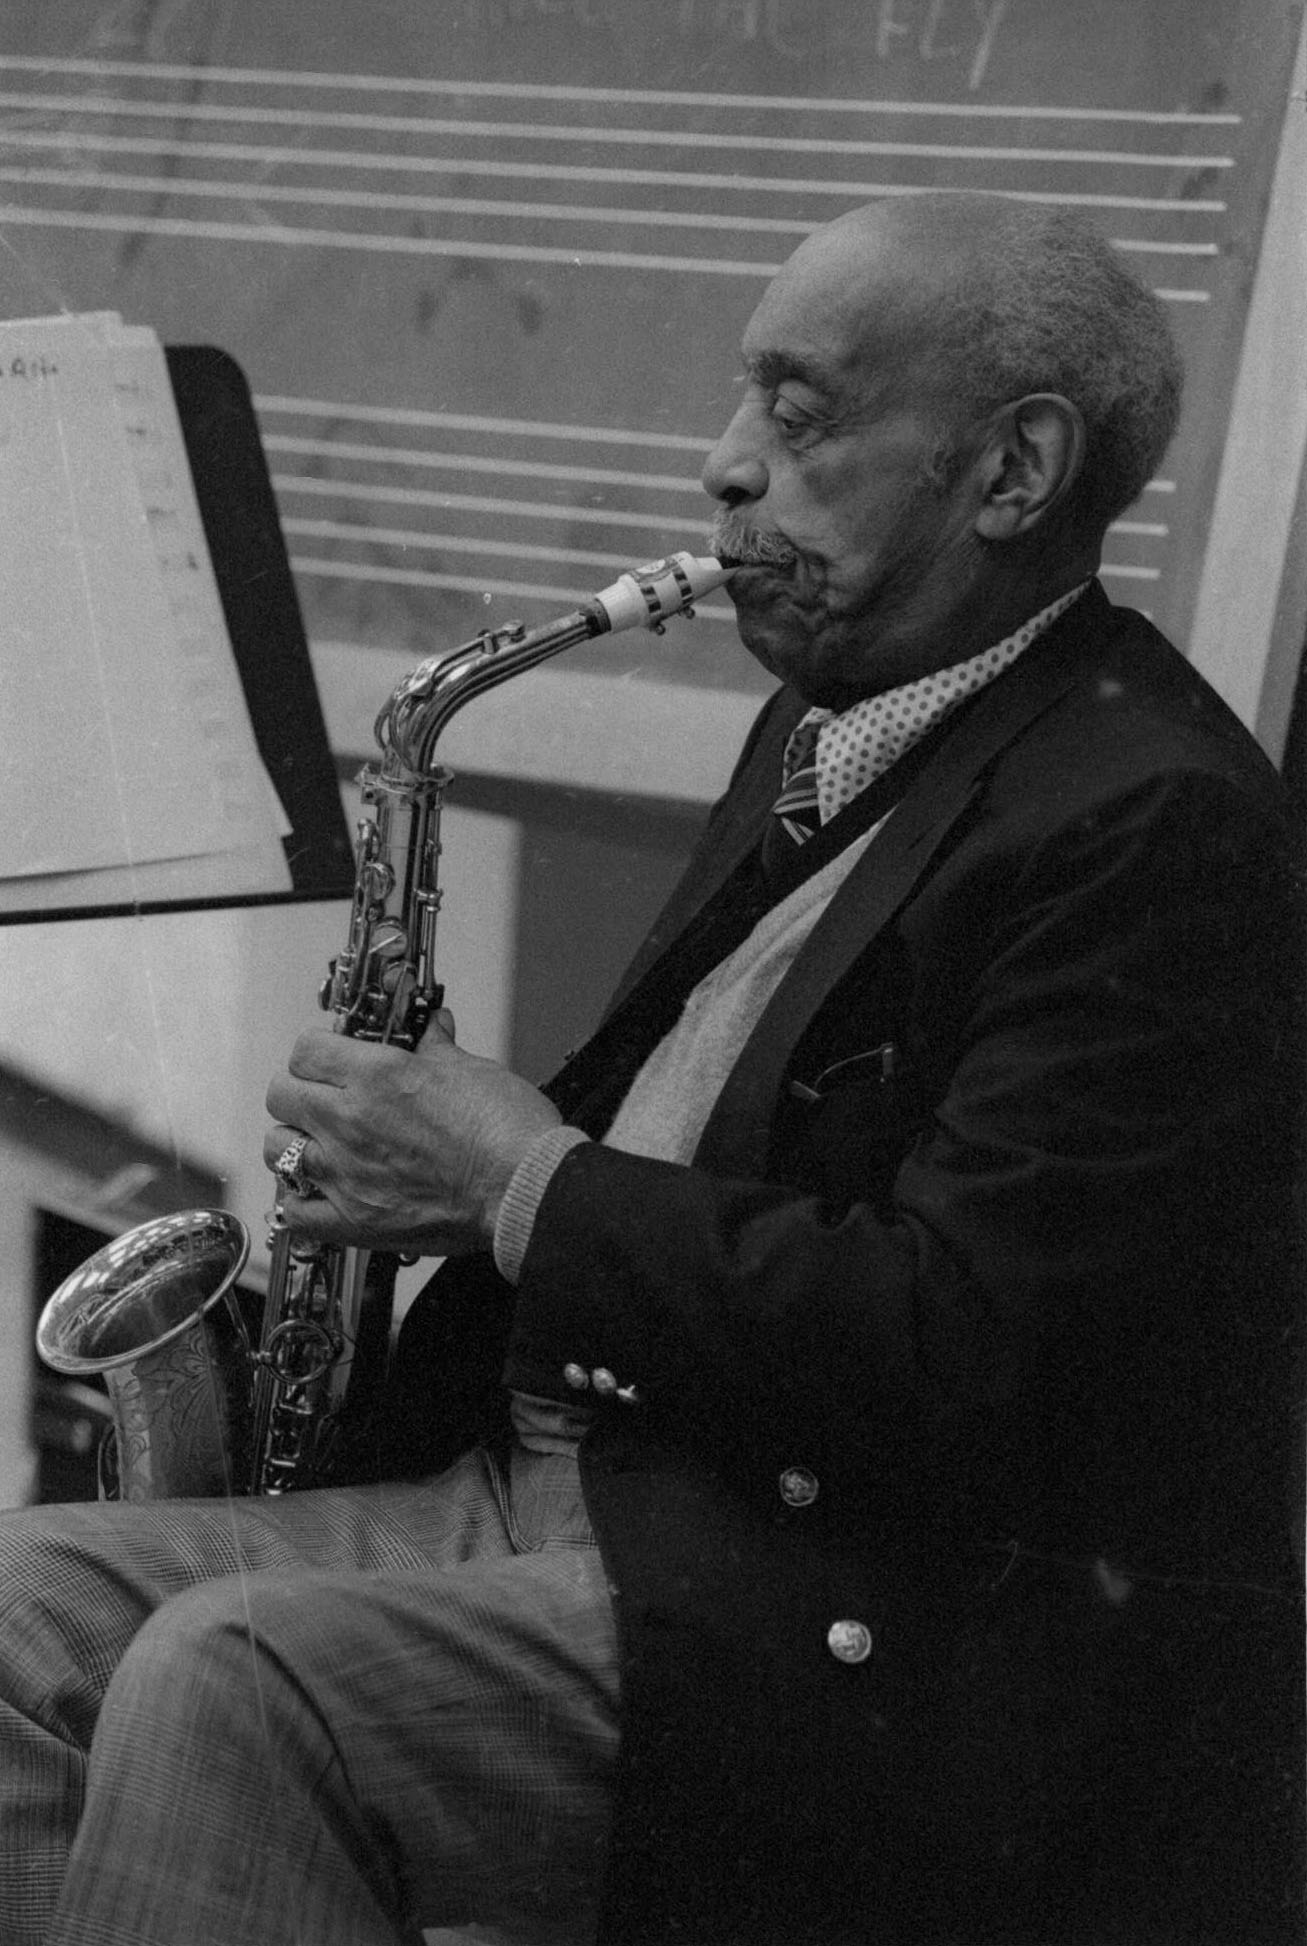 Benny Carter, visiting guest artist, during rehearsal in Room 120 (today the Ray Wright Room) at the Eastman School of Music on October 17th, 1996. Photo by Louis Ouzer.